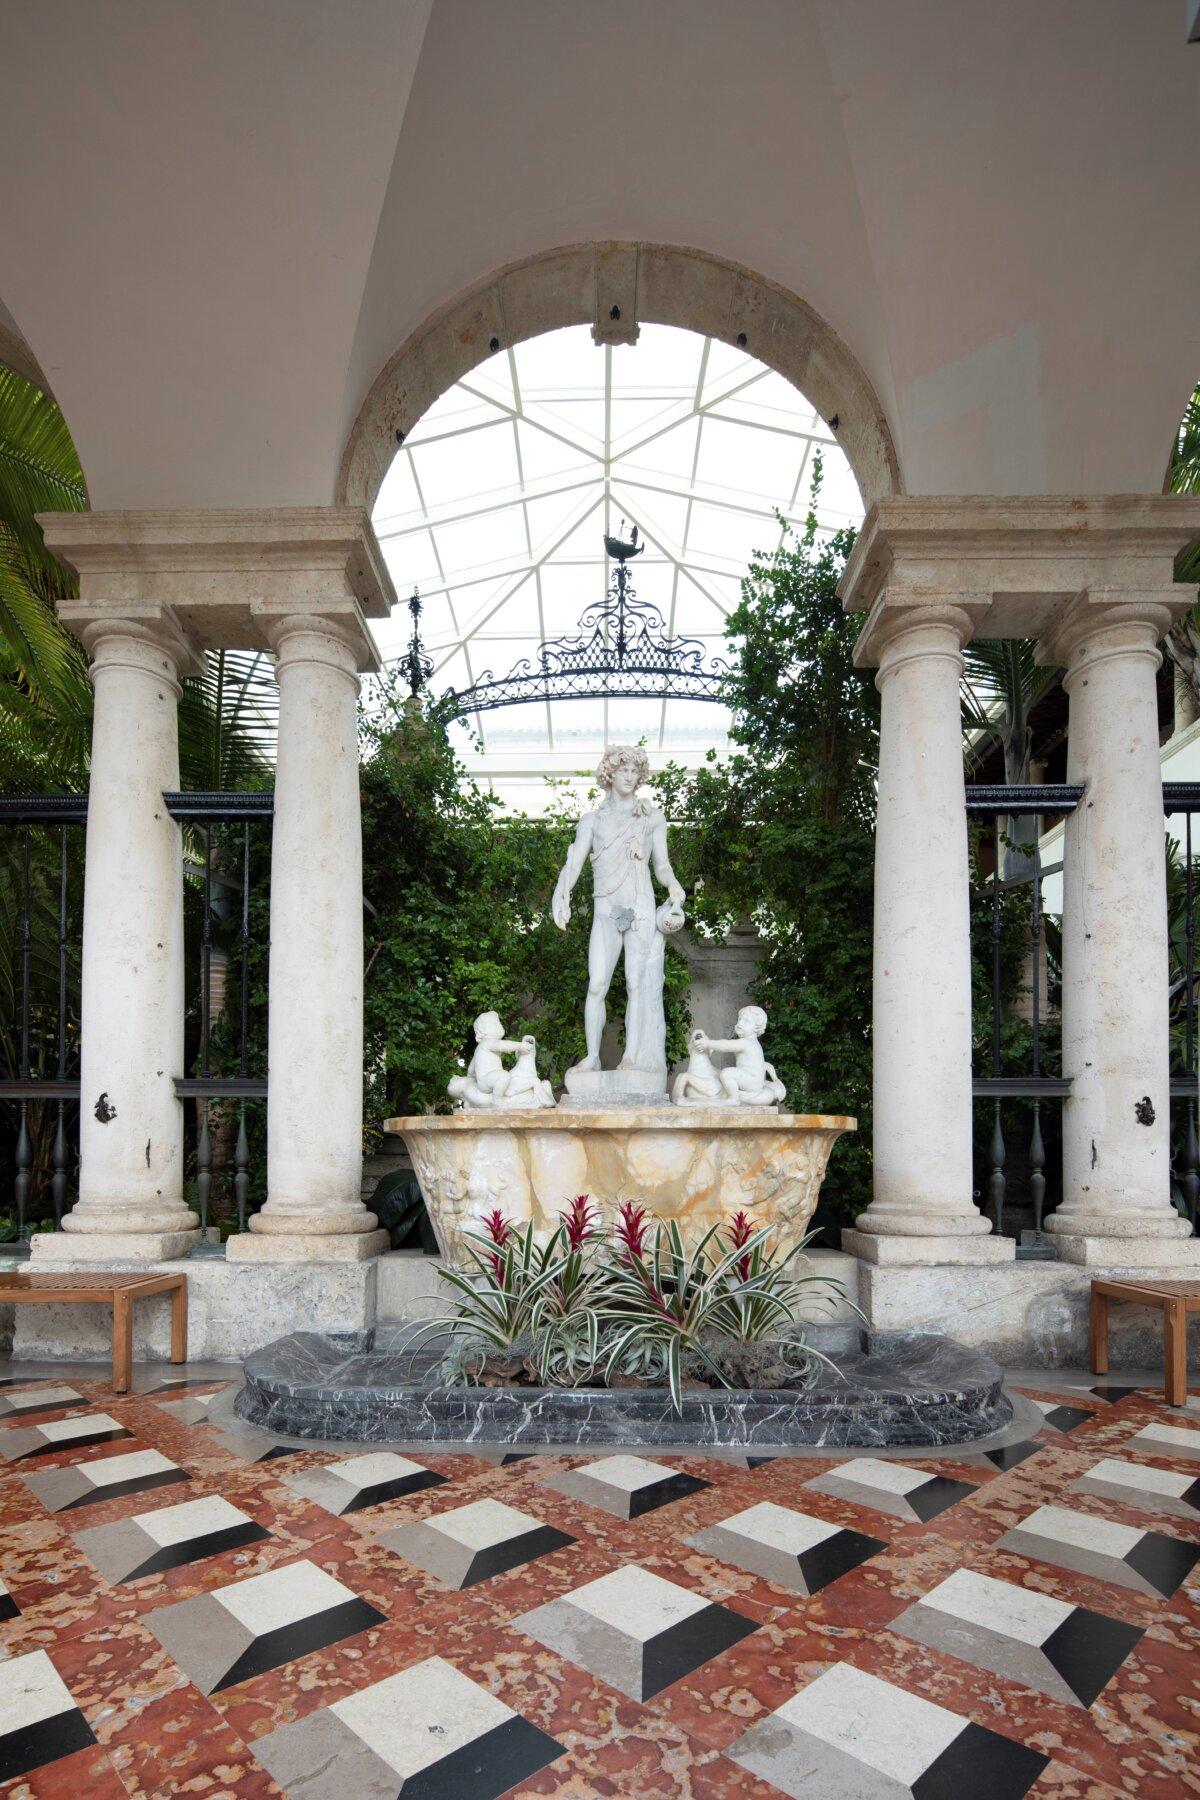 The courtyard, with its symmetrical marble columns bolstering a centerpiece arch, was created to serve as a courtyard garden. The statuary sits on a coral limestone floor, which was quarried on-site during the estate’s construction. Although the space was originally open, a glass canopy was installed in 1983 and upgraded in 2012 to preserve the items on display. (Robin Hill/Vizcaya Museum and Gardens)